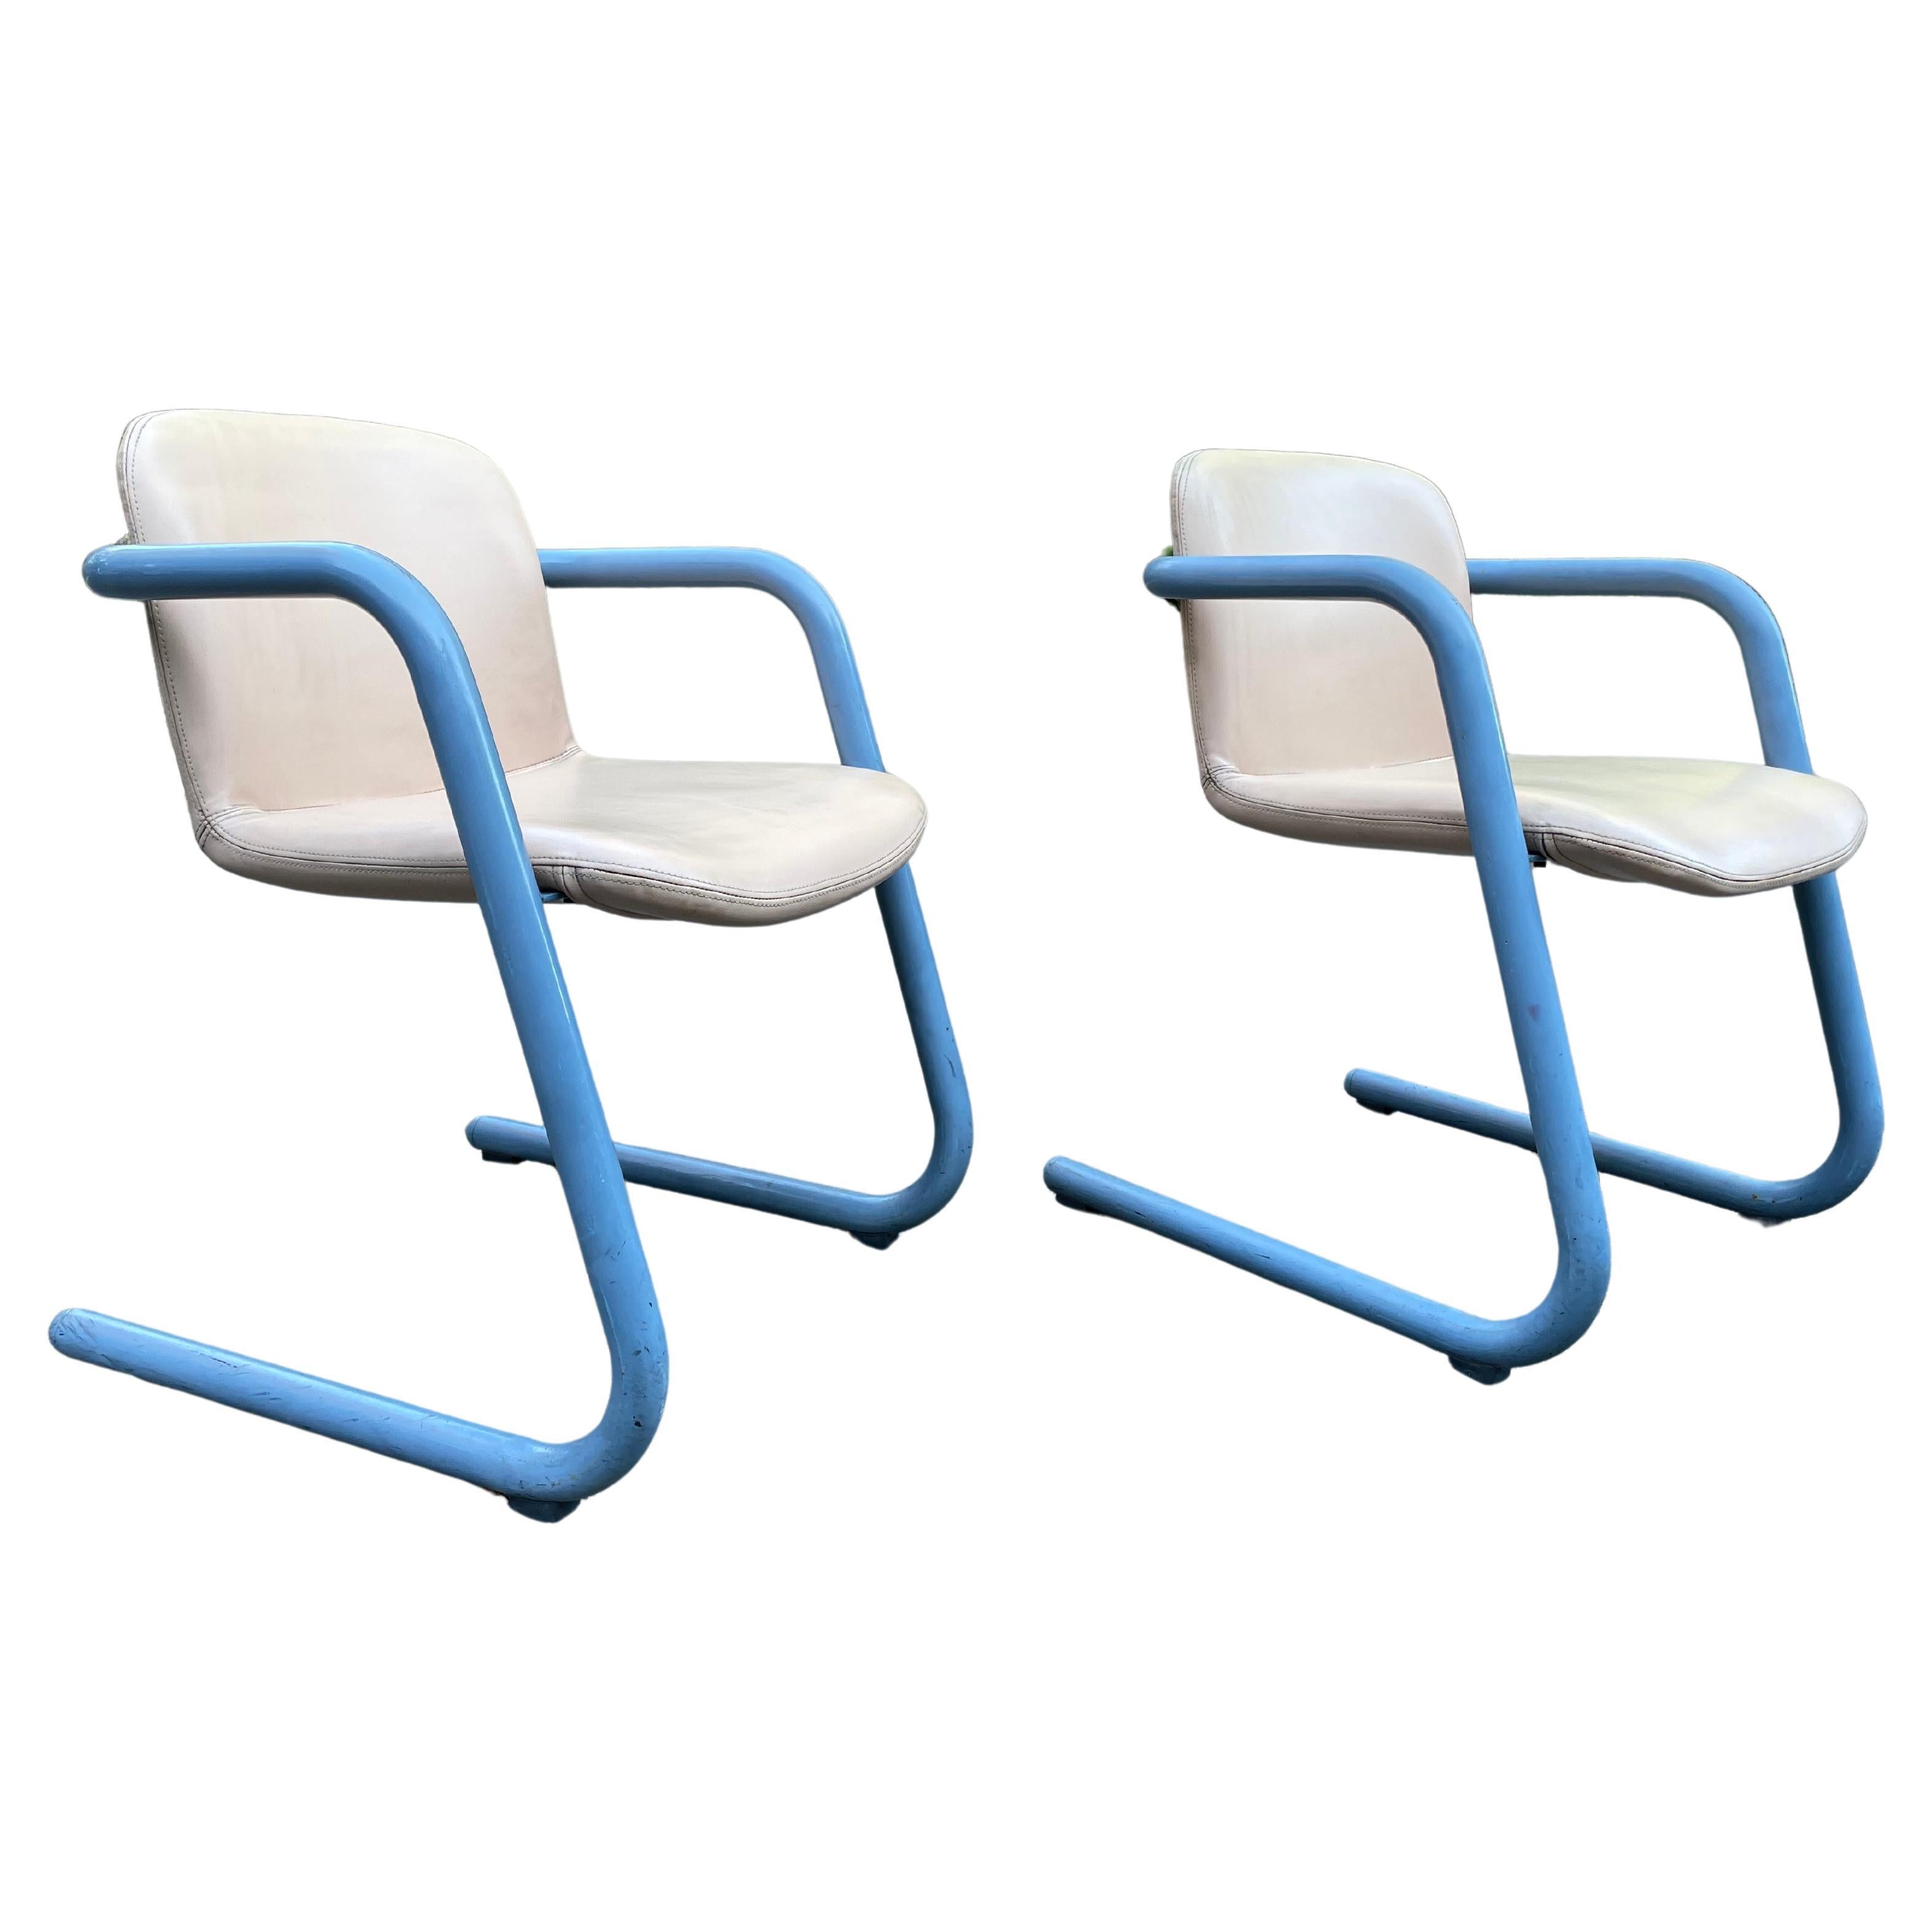 Set of 2 Vintage Kinetics Blue & Tan 100/300 Chairs, circa 1970’s in good condition. Designed by Philip Salmon and Hugh Hamilton for Kinetics.

Really cool. Price is for the pair.

Good vintage condition with minor flaws as expected with age. See